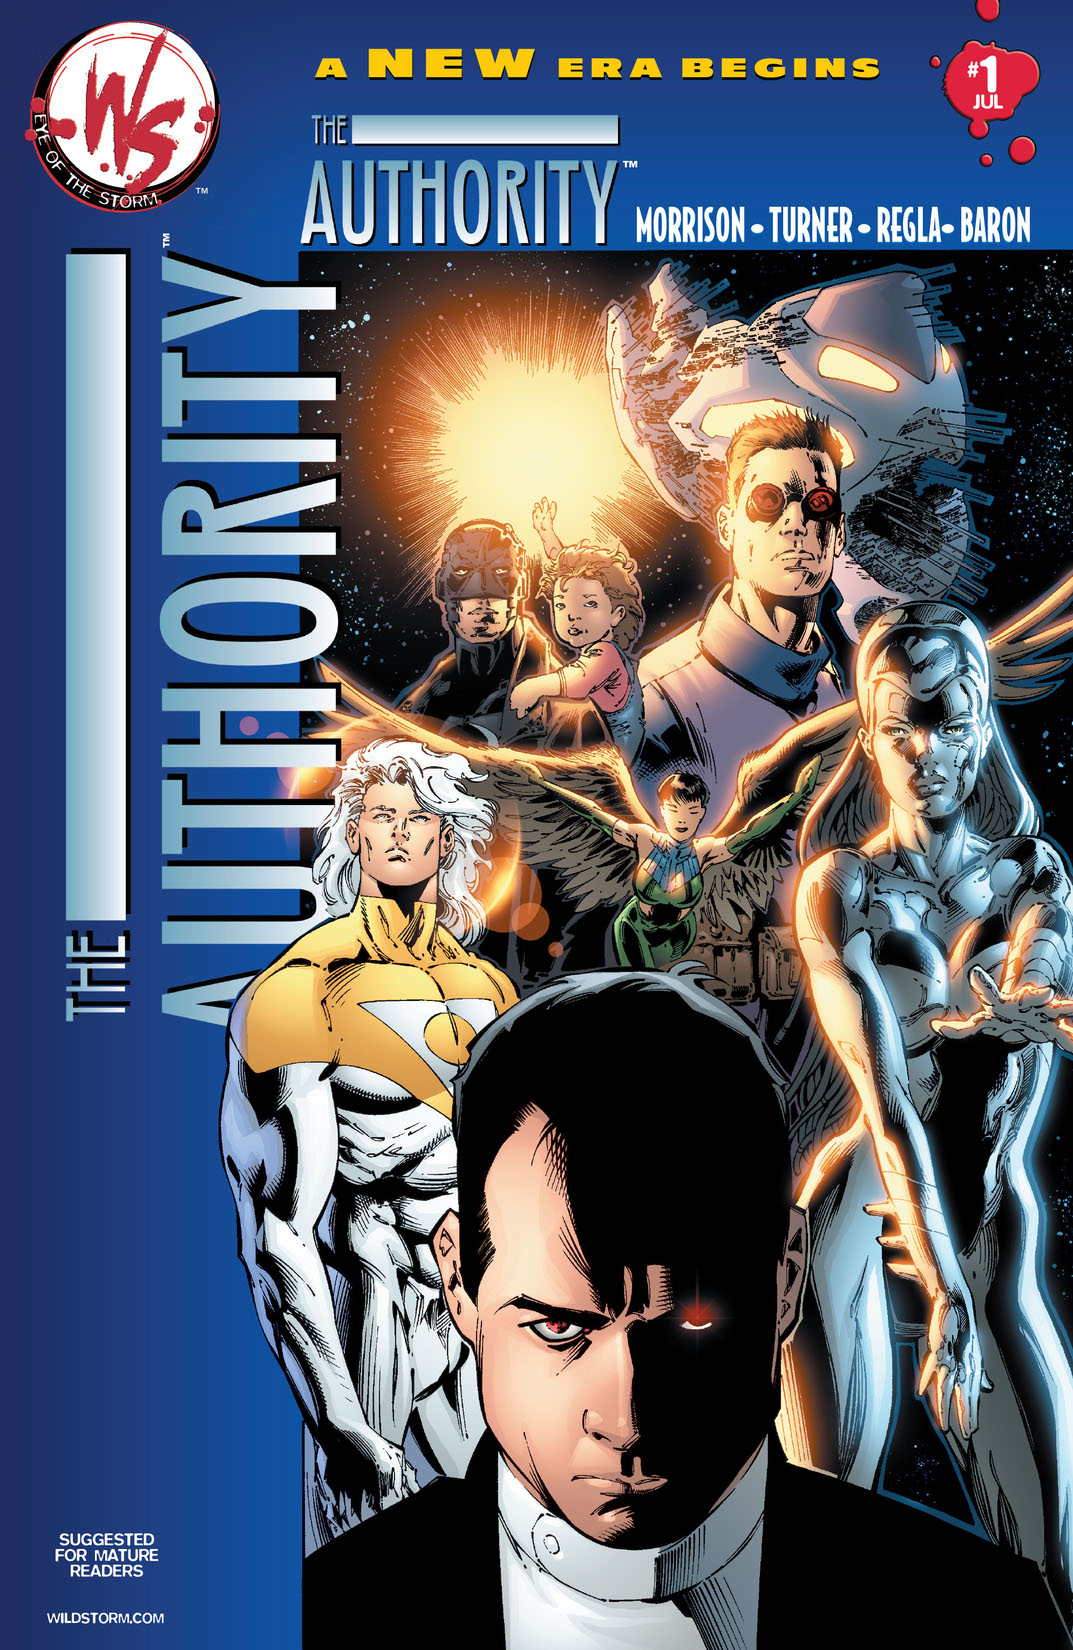 The Authority (2003-2004) #1 preview images